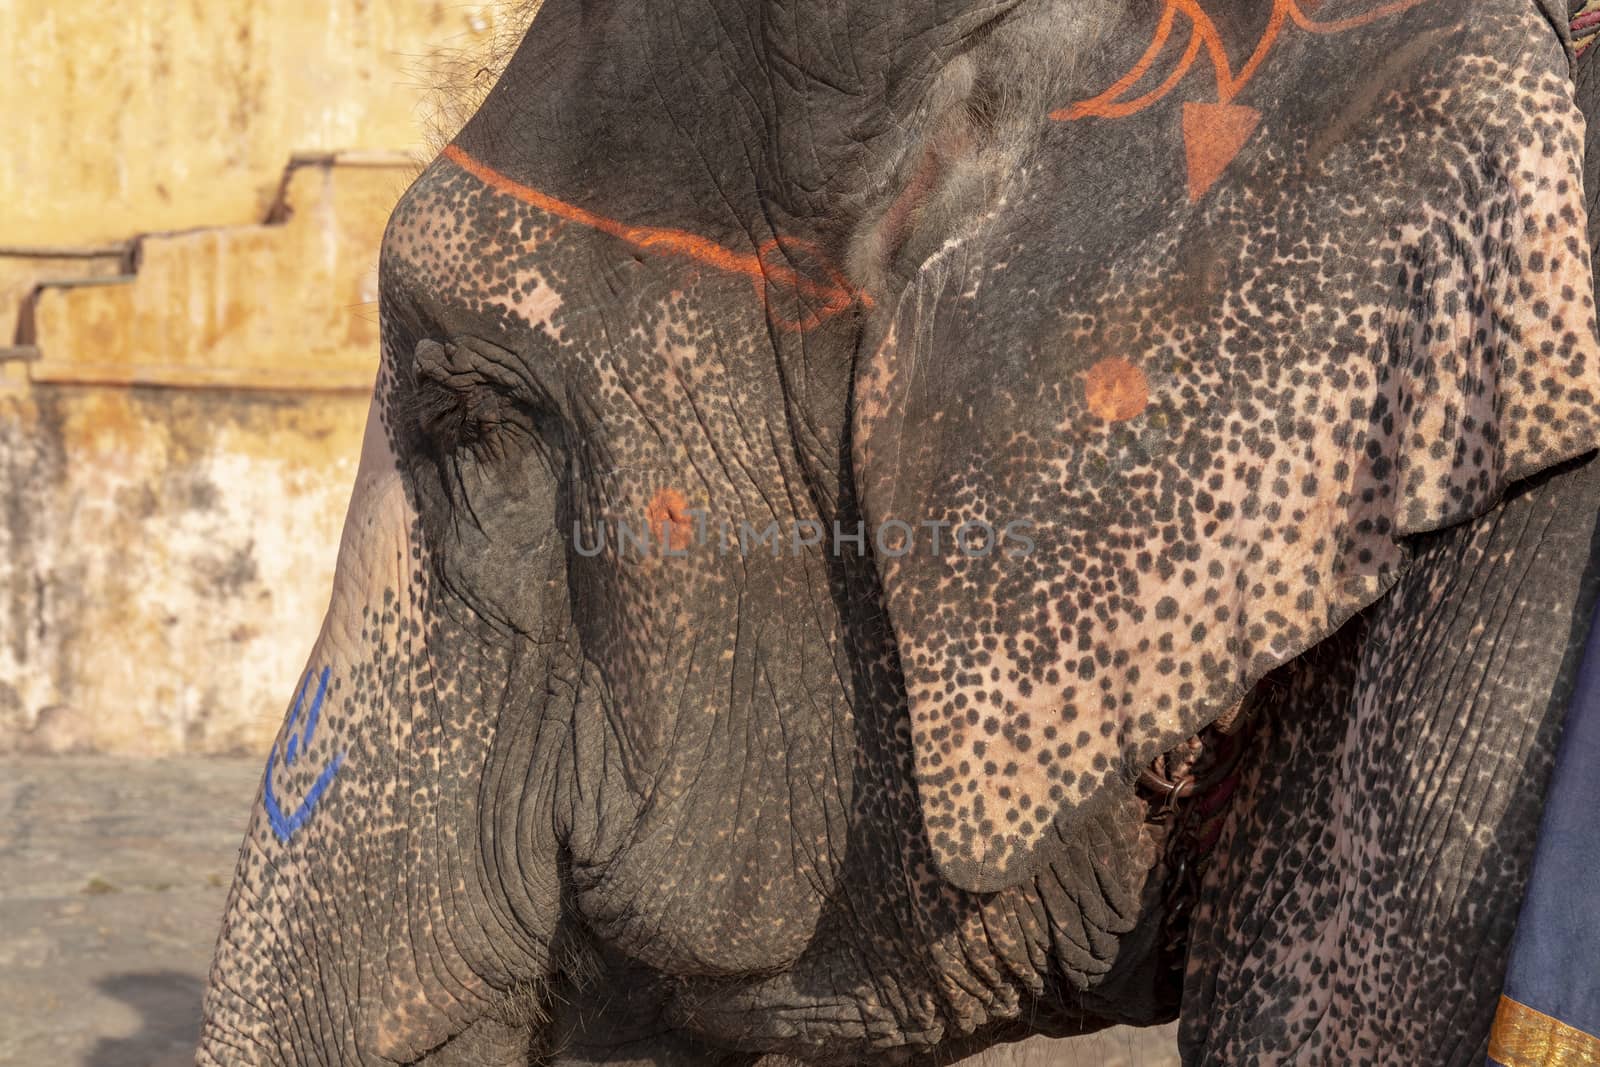 Decorated elephant at the annual elephant festival in Jaipur, In by Tjeerdkruse